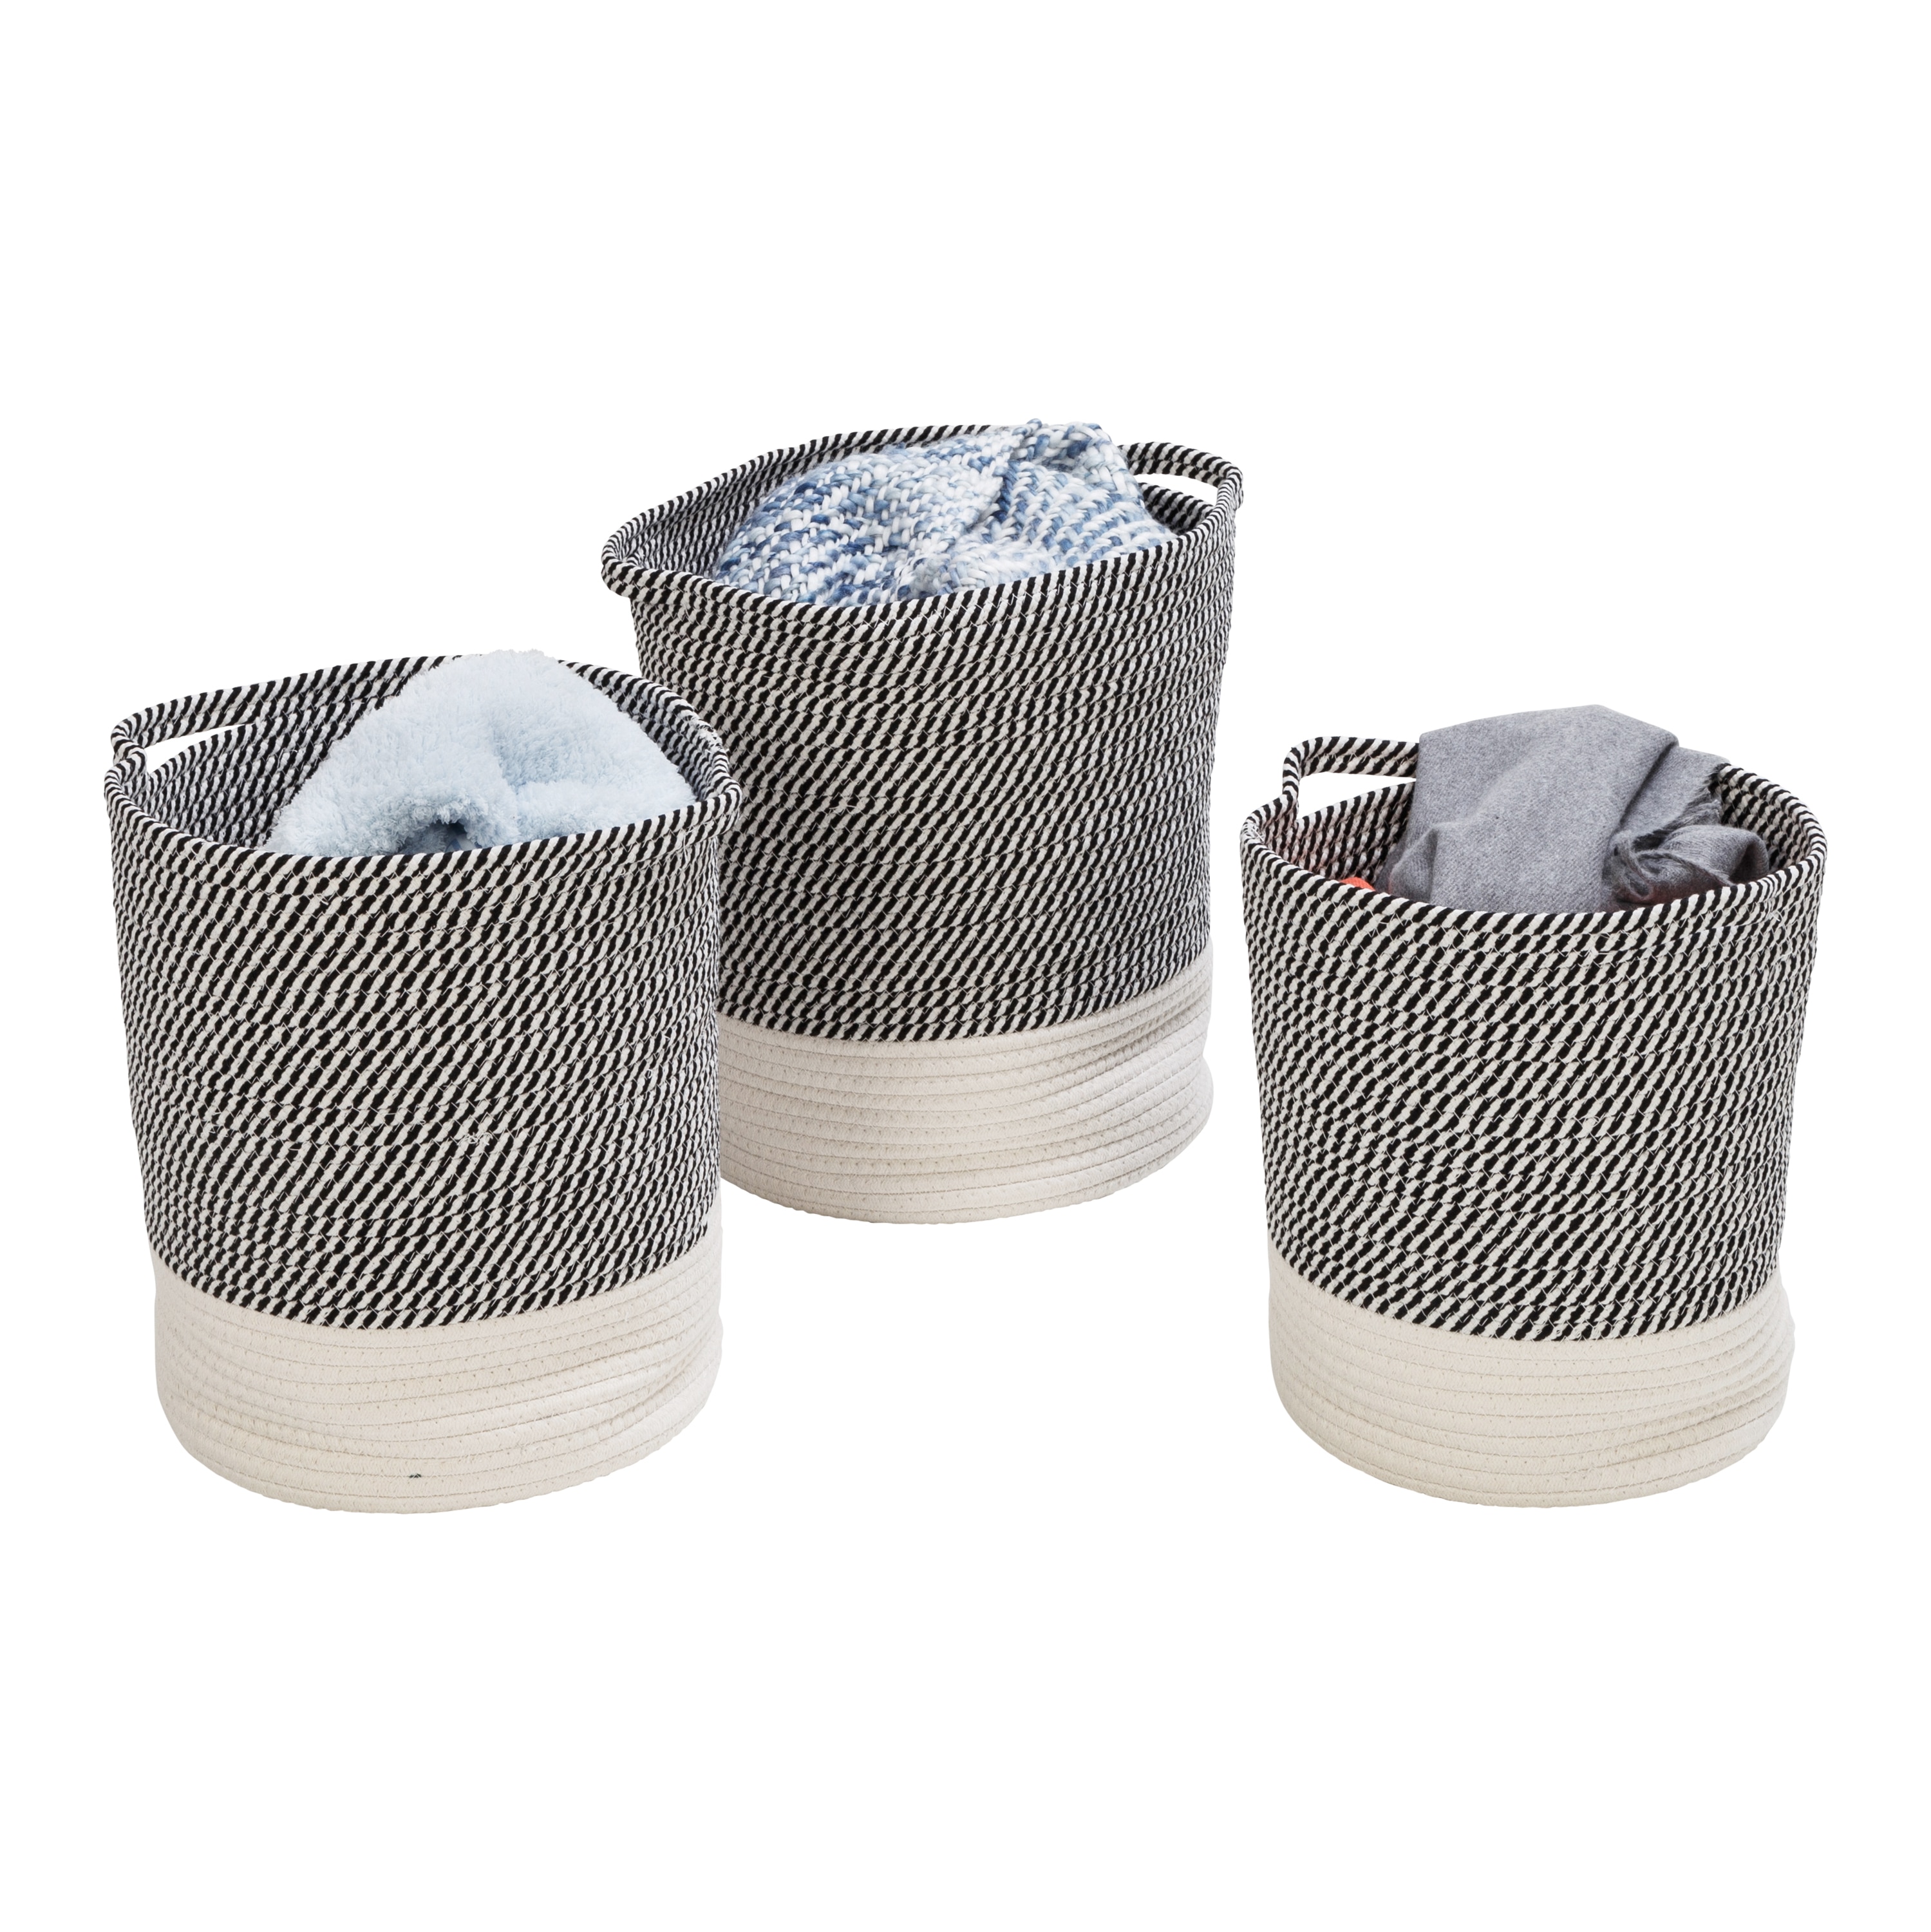 Set of 3 Gray/White Cotton Rope Baskets